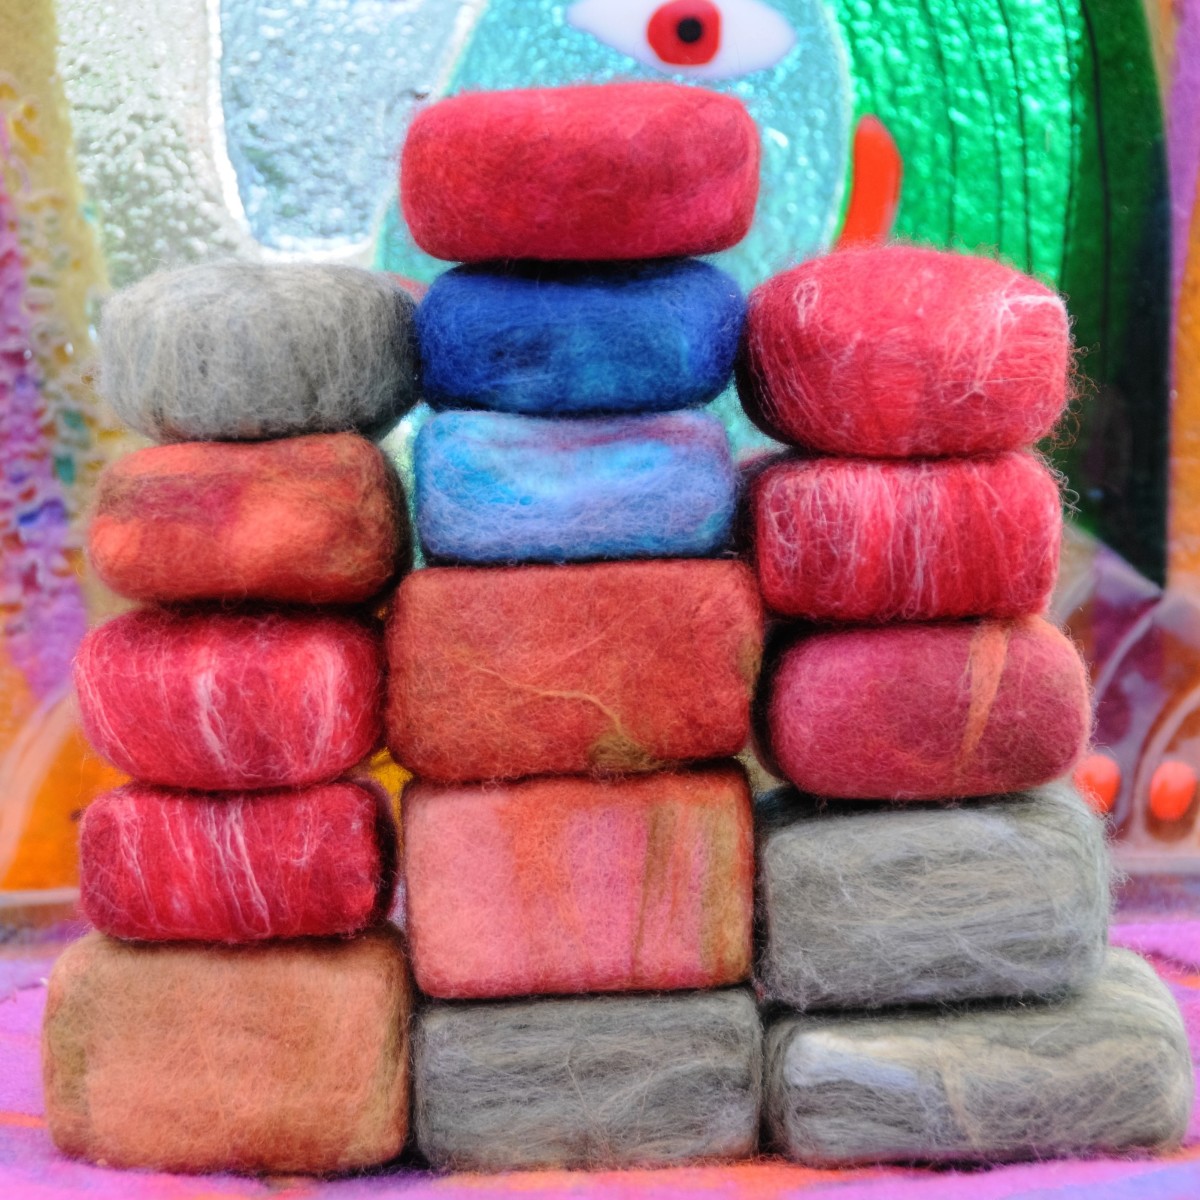 How to Make Wet-Felted Soaps Using a Tumble Dryer